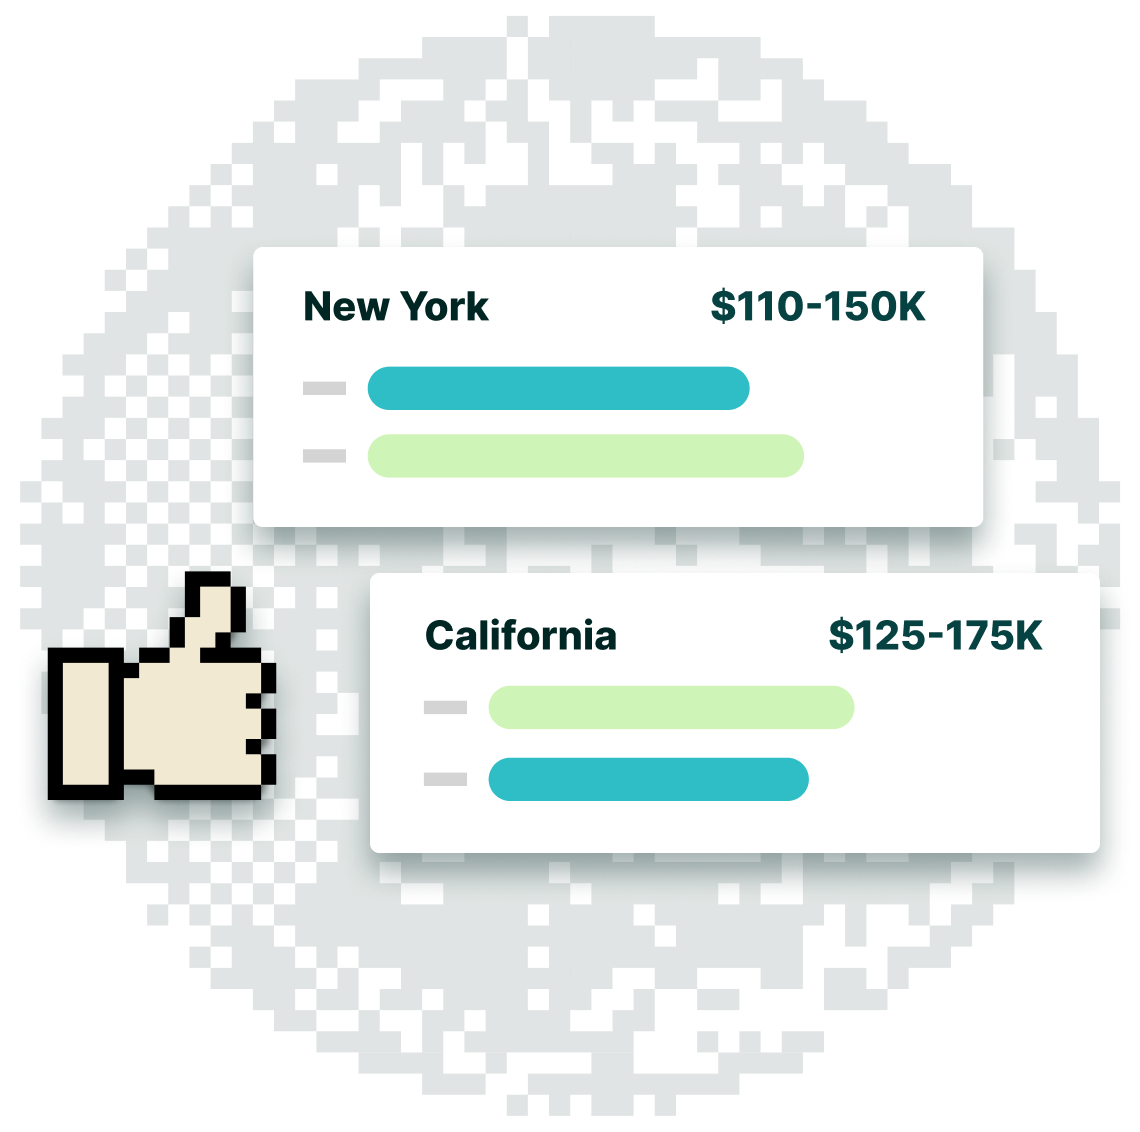 Illustration of Salary Ranges for NY and CA